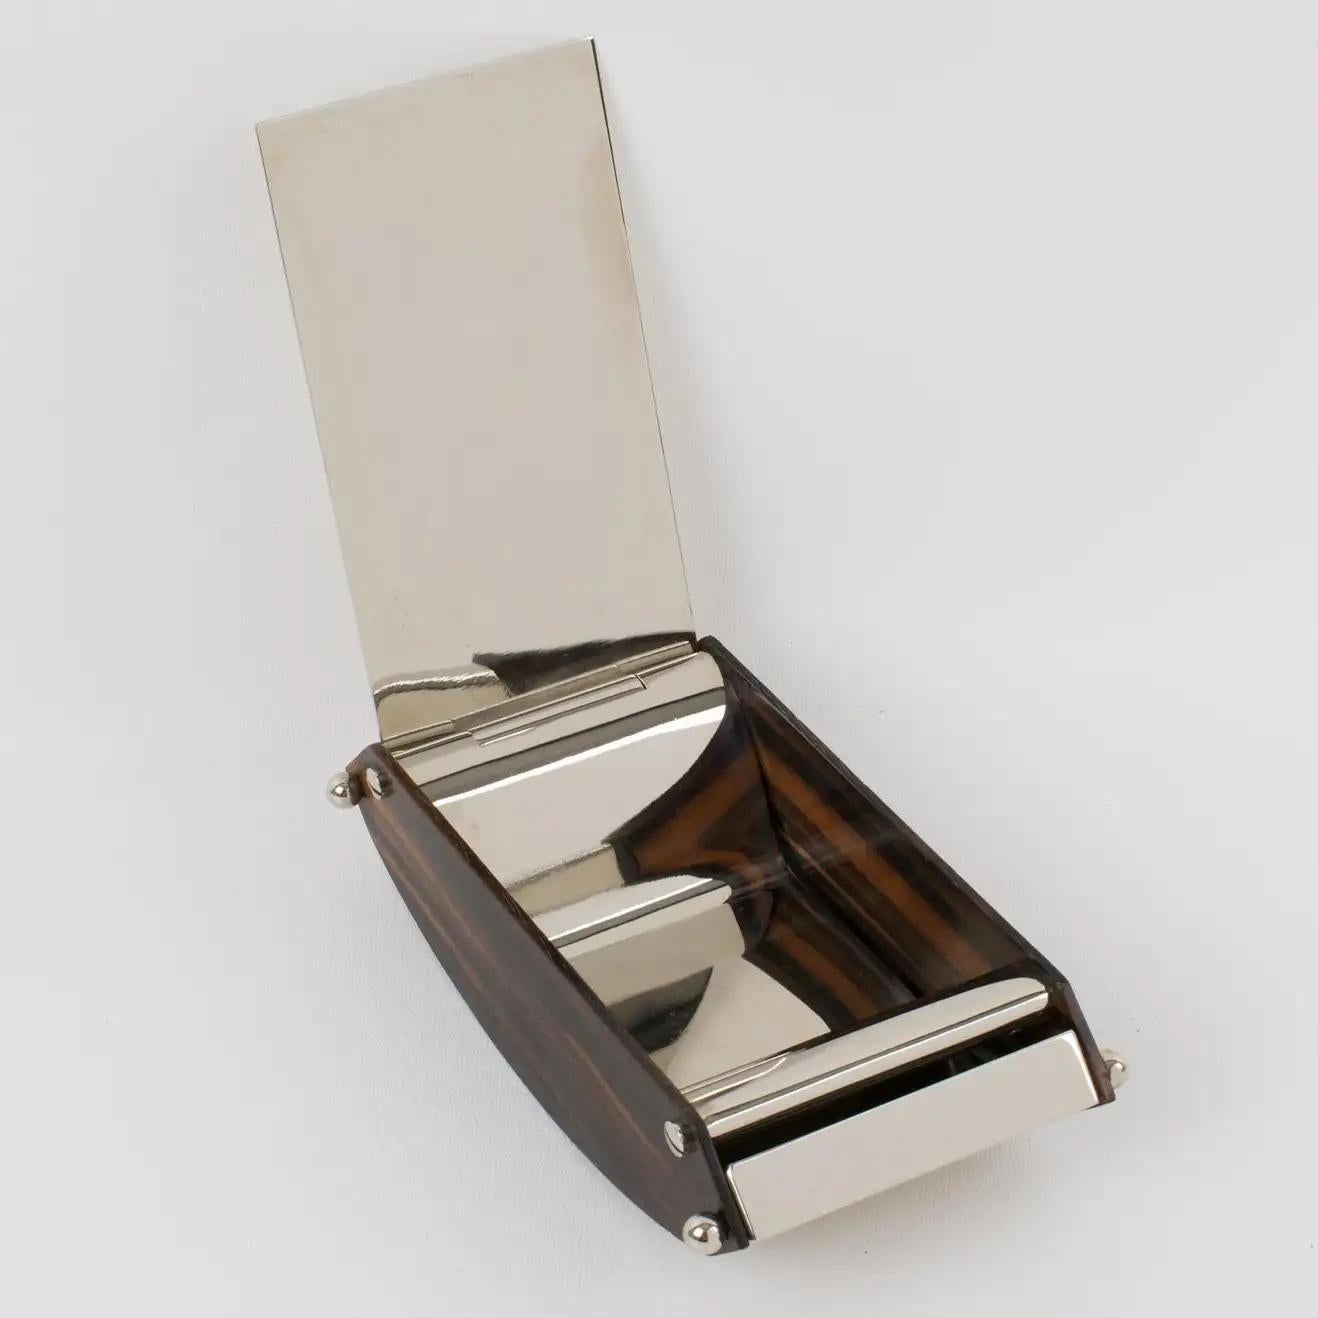 Maison Desny Style Art Deco Box Macassar Wood and Chrome, France 1930s In Excellent Condition For Sale In Atlanta, GA